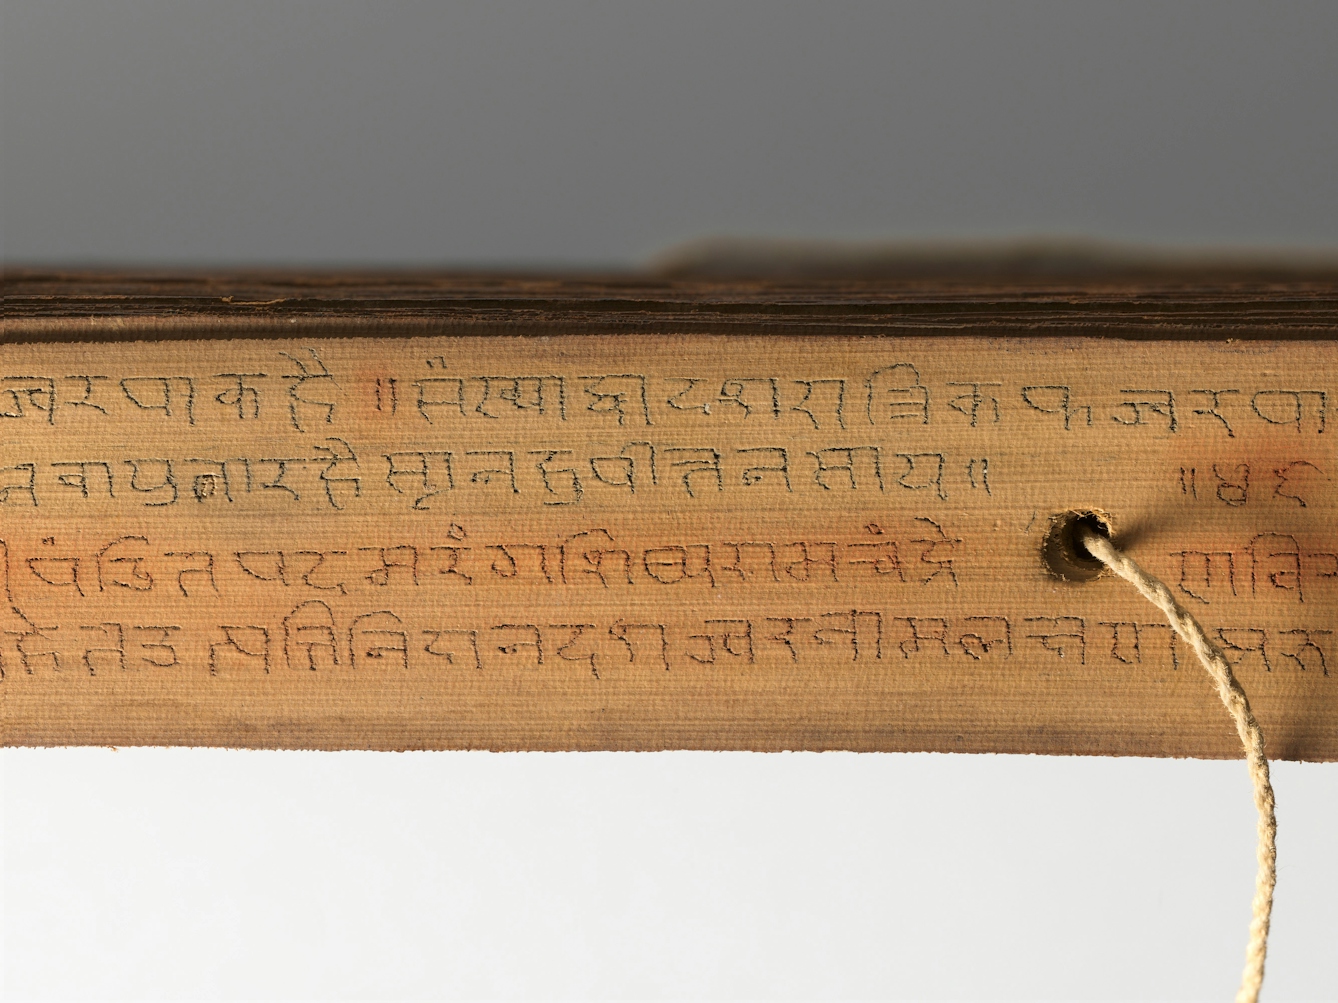 Deail of a strip from a palm leaf manuscript showing text inscribed in Hindi and a string connecting all the leaves emerging from a hole in the strip